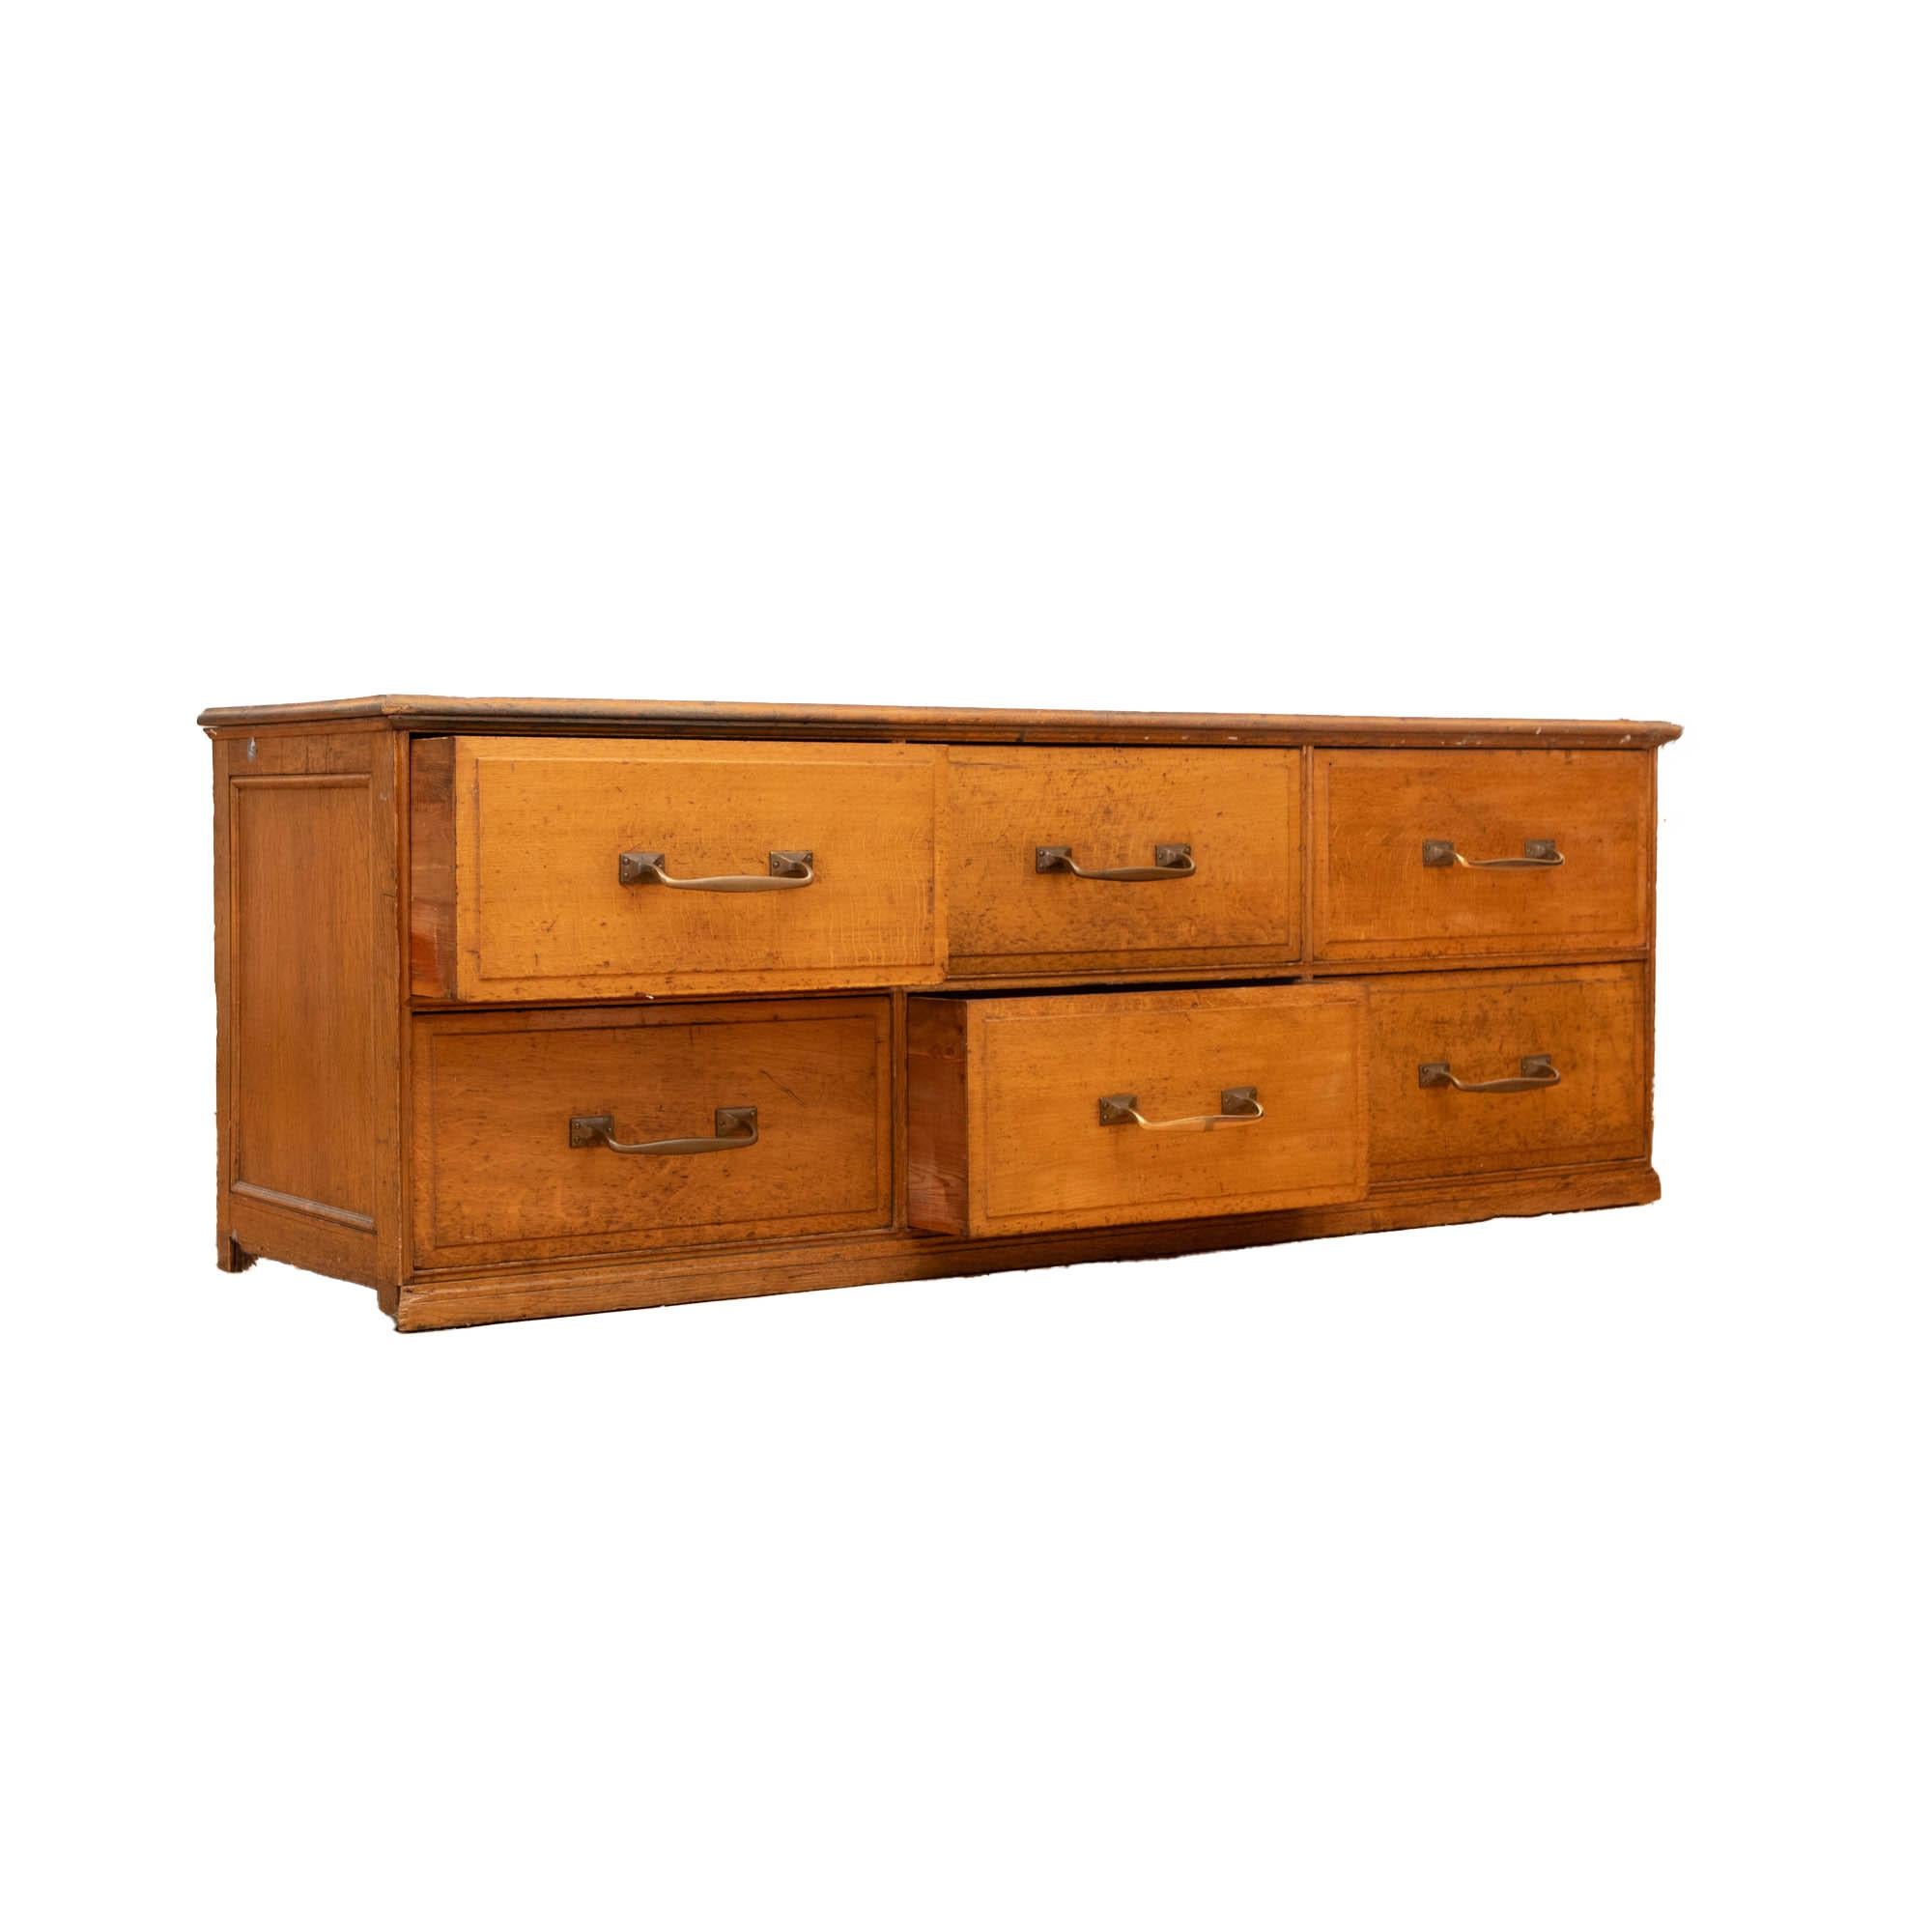 Great set of vintage, early  1900s haberdashery drawers from an old textile factory. 
Solid wooden top, sides and drawers, with brass handles. Pine clad back panel. 
Ideal kitchen island.
Perfect for retail or hospitality environment. 
We have